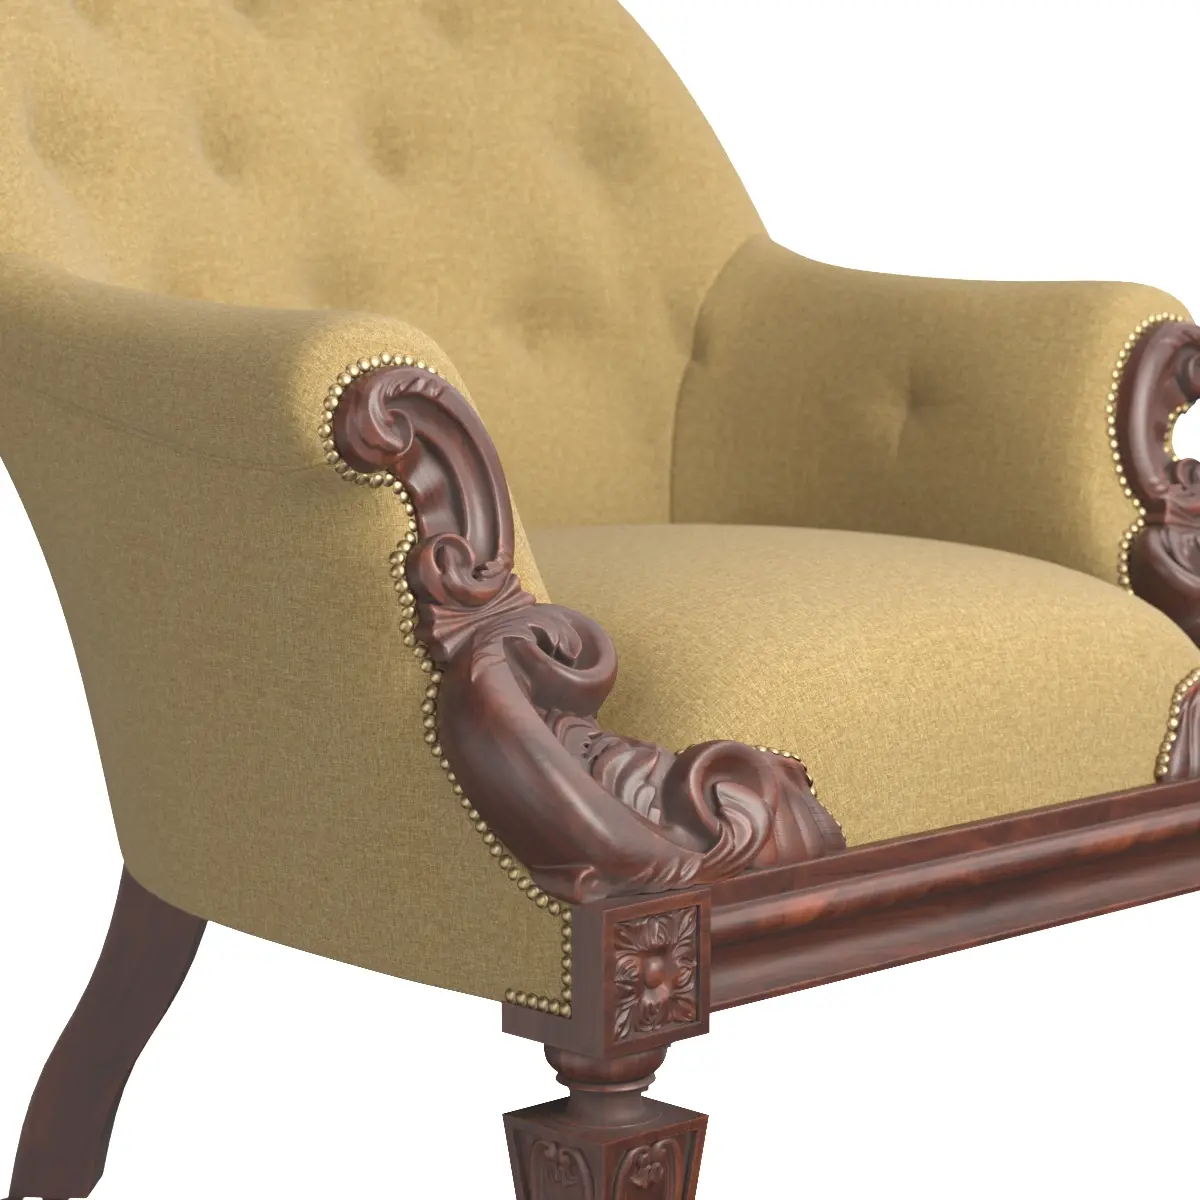 Early Victorian Rosewood Armchair 3D Model_05